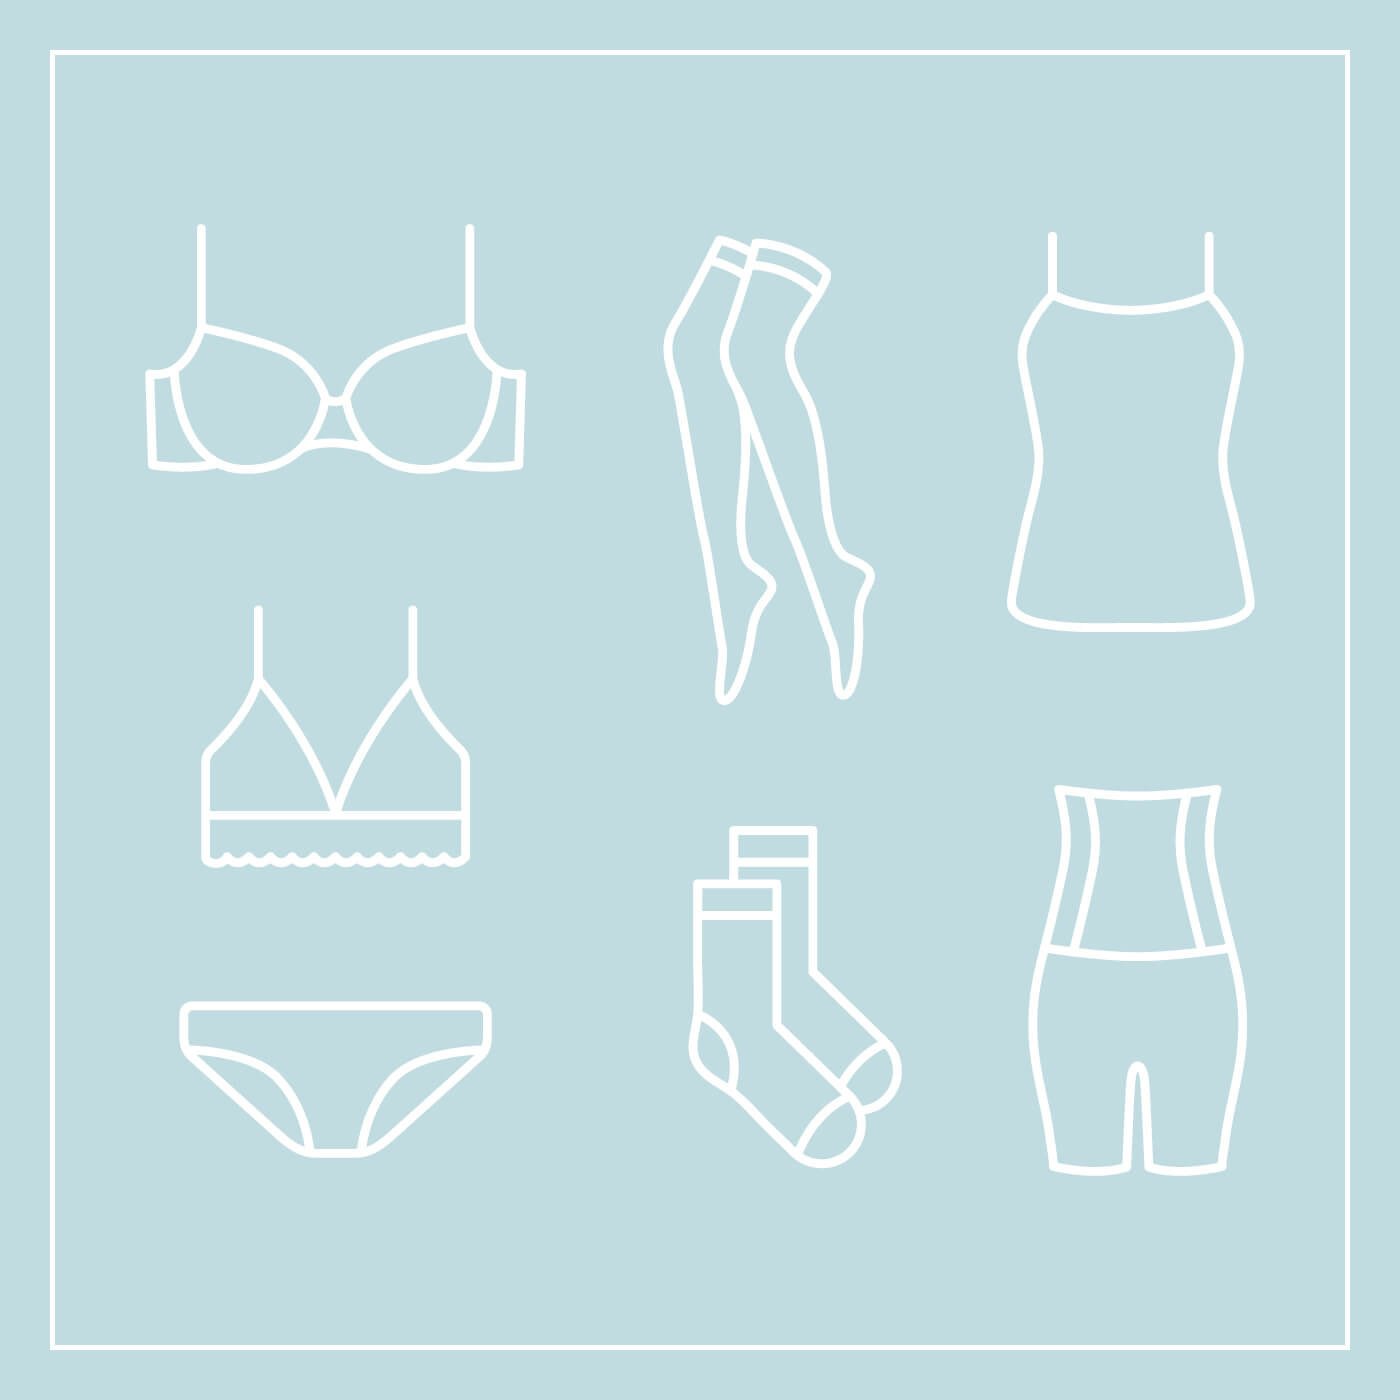 Panty Style Guide, Blog